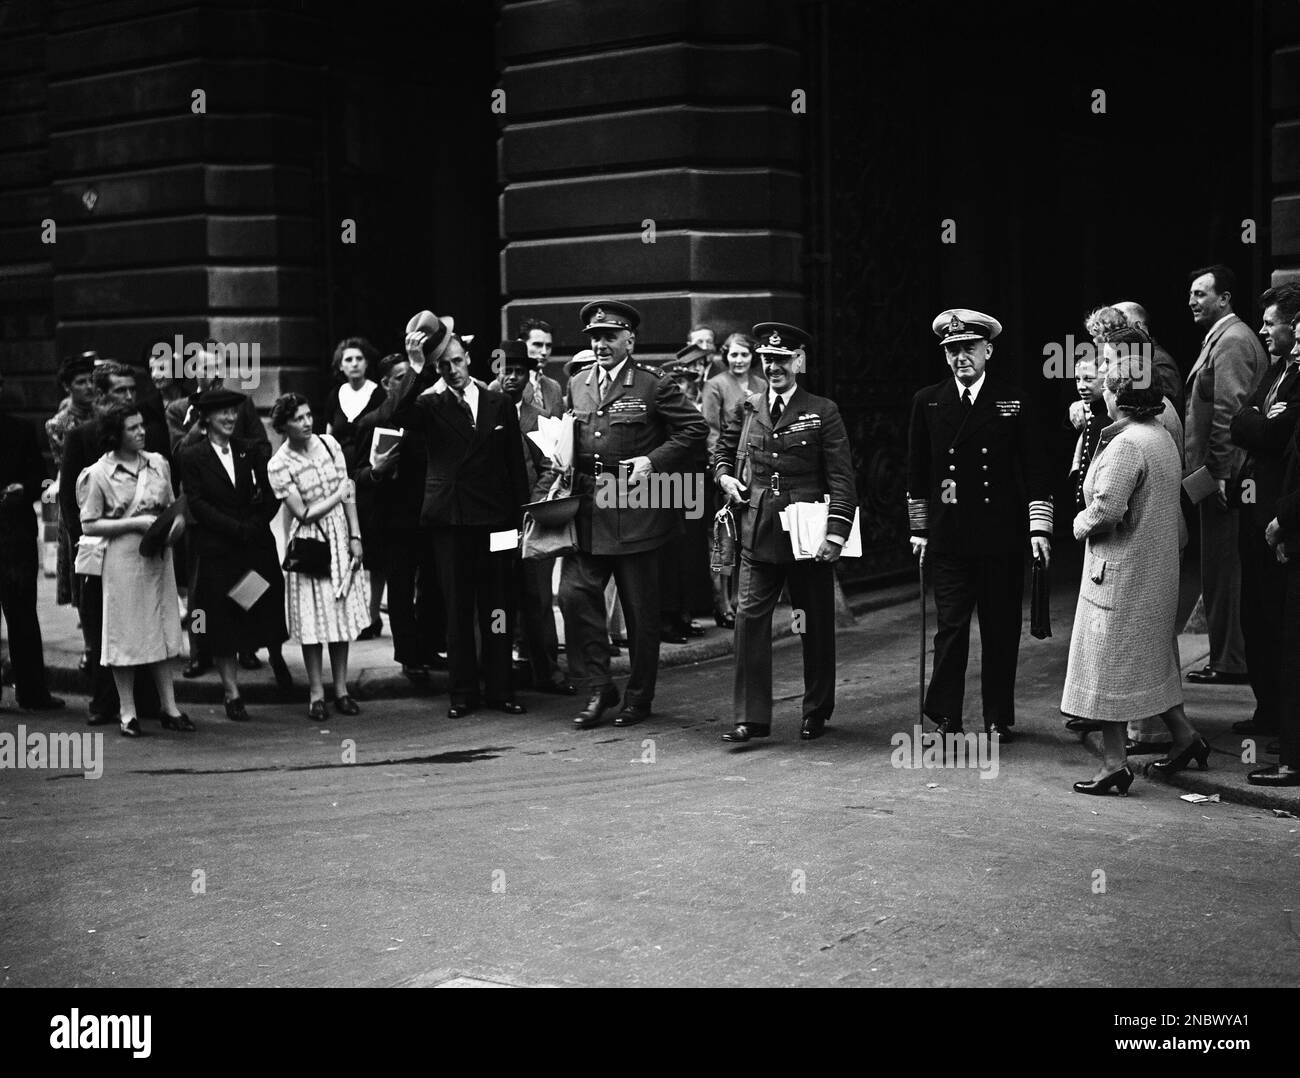 Leaders of the Army, Royal Navy and Royal Air Force arrive together for a meeting at 10 Downing Street. From left to right are: General Edmund Ironside, Chief of the Imperial General Staff, Air Marshal Sir Cyril Newall, and Admiral Sir Dudley Pound, arriving at 10, Downing street in London, on Sept. 8, 1939. (AP Photo) Banque D'Images